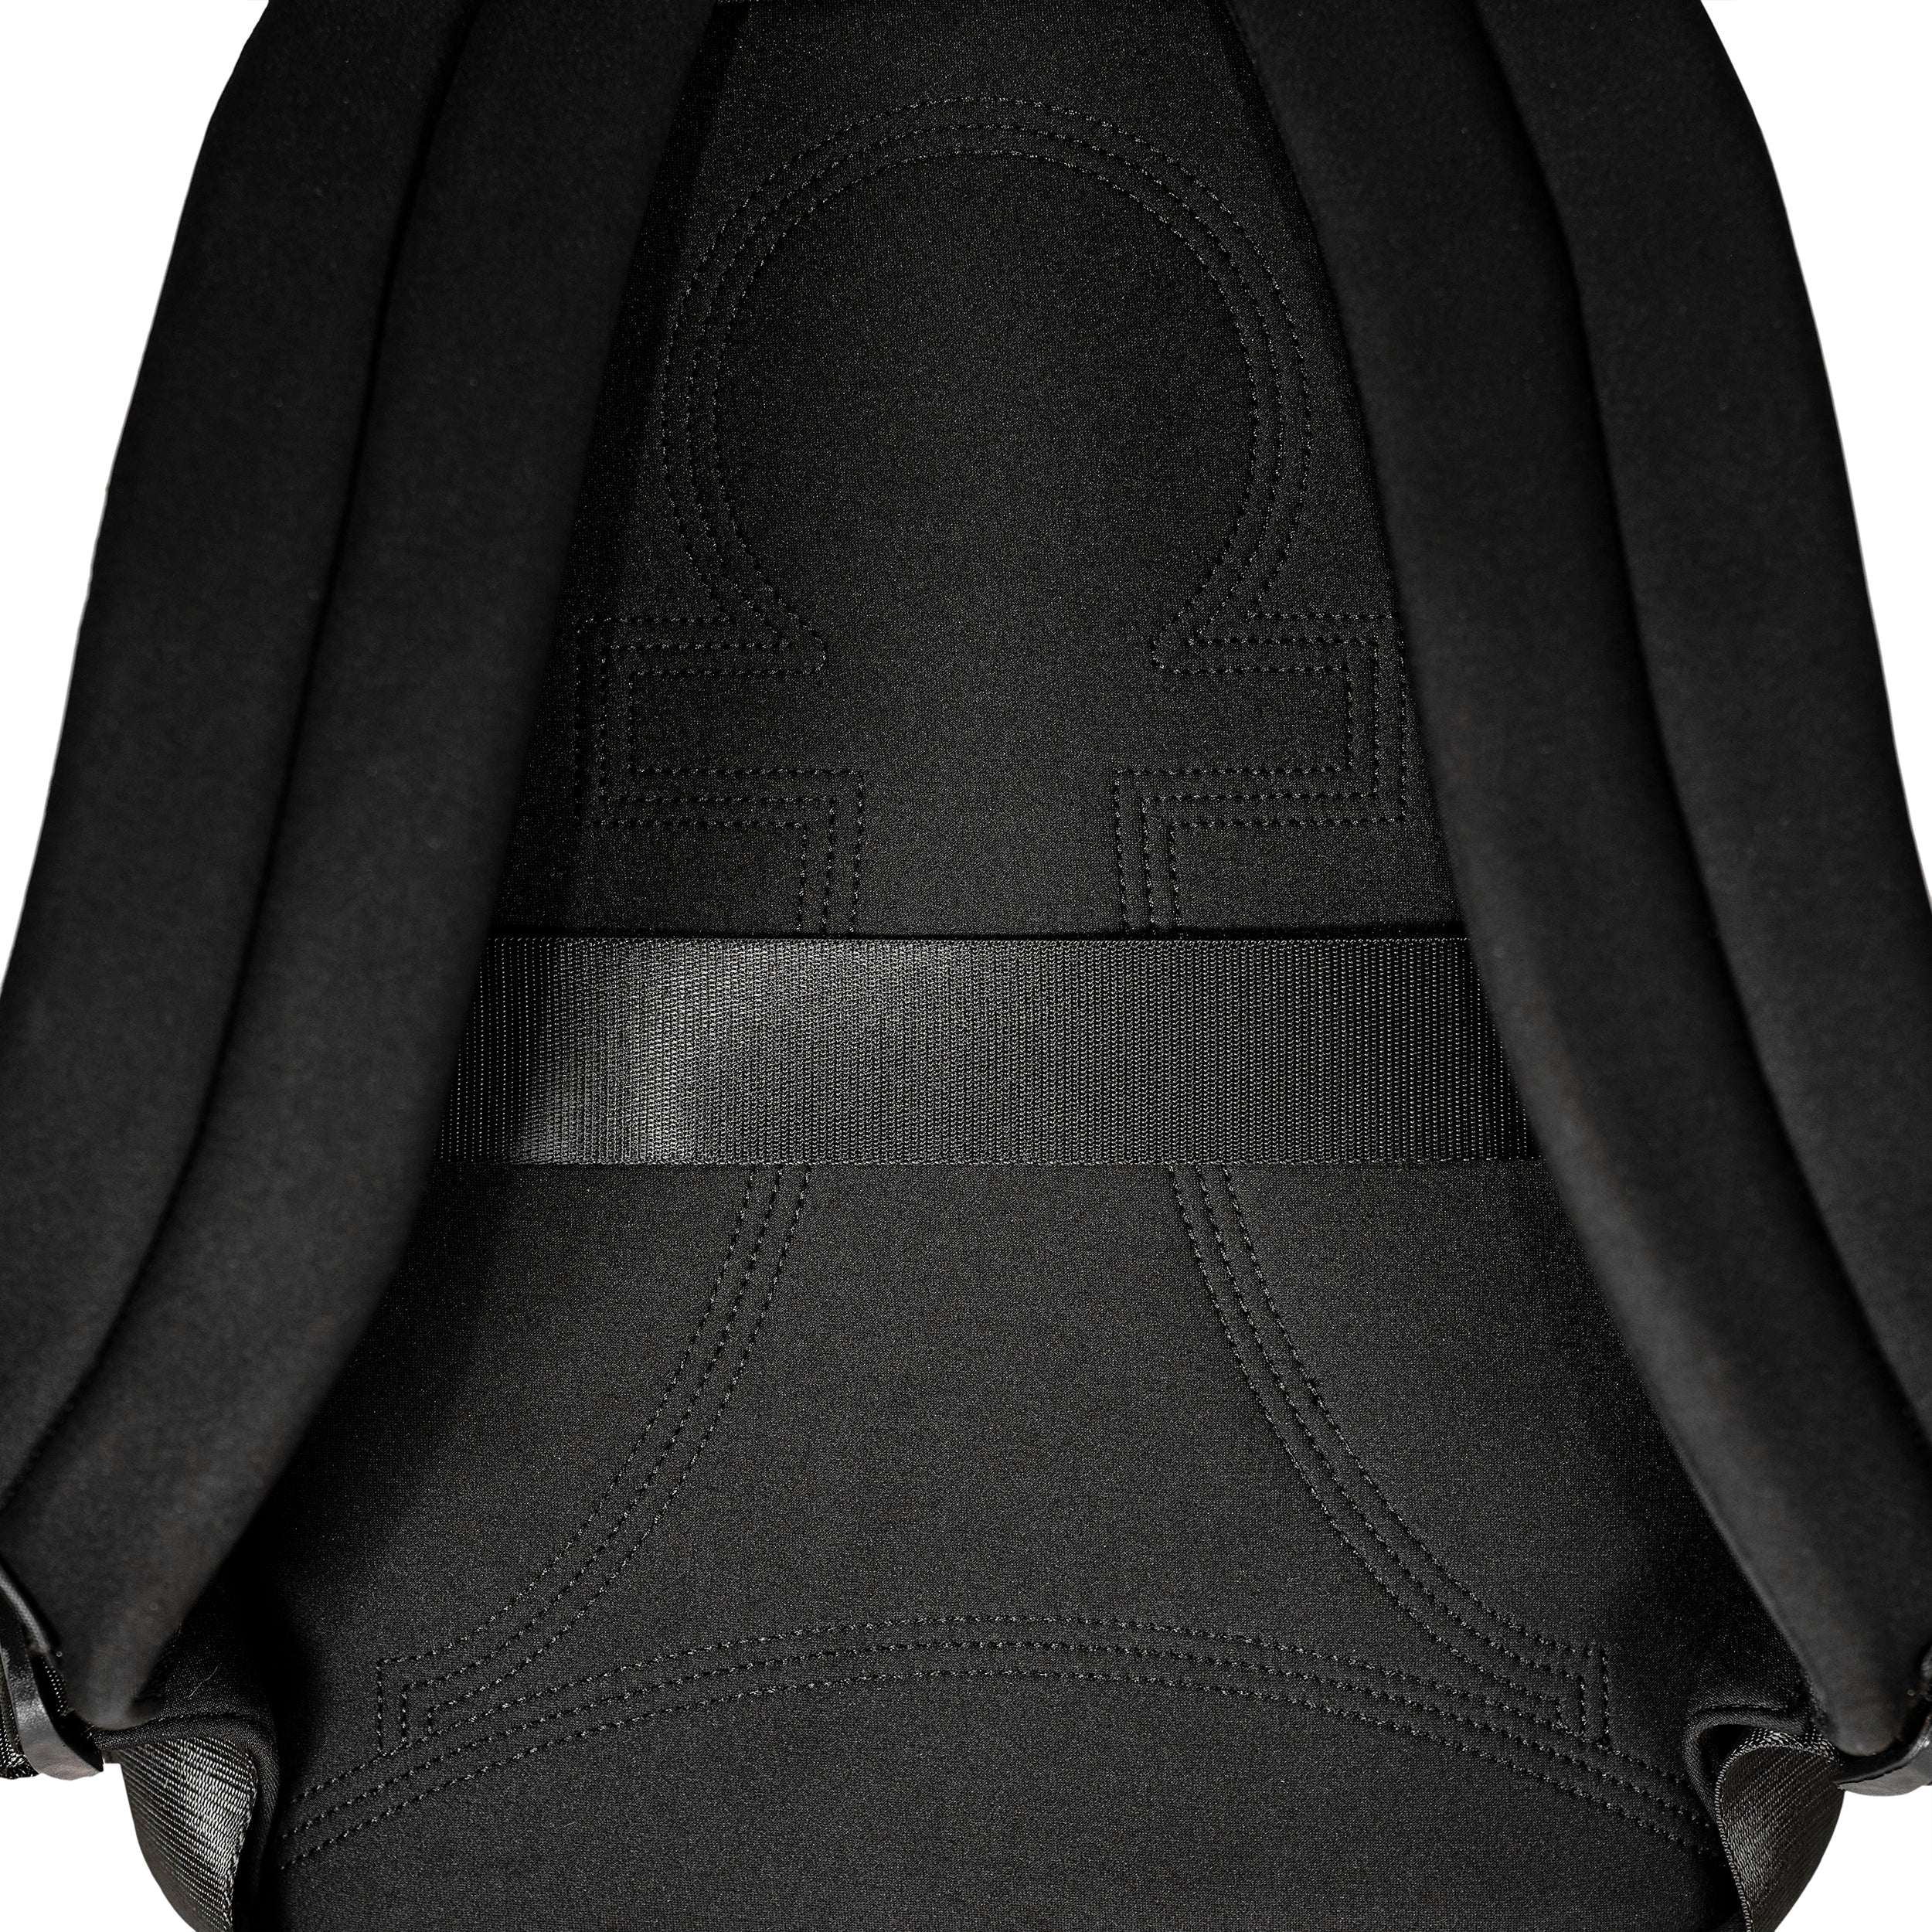 FRONT Queening The Pawn Backpack SB22 - BLACK - M